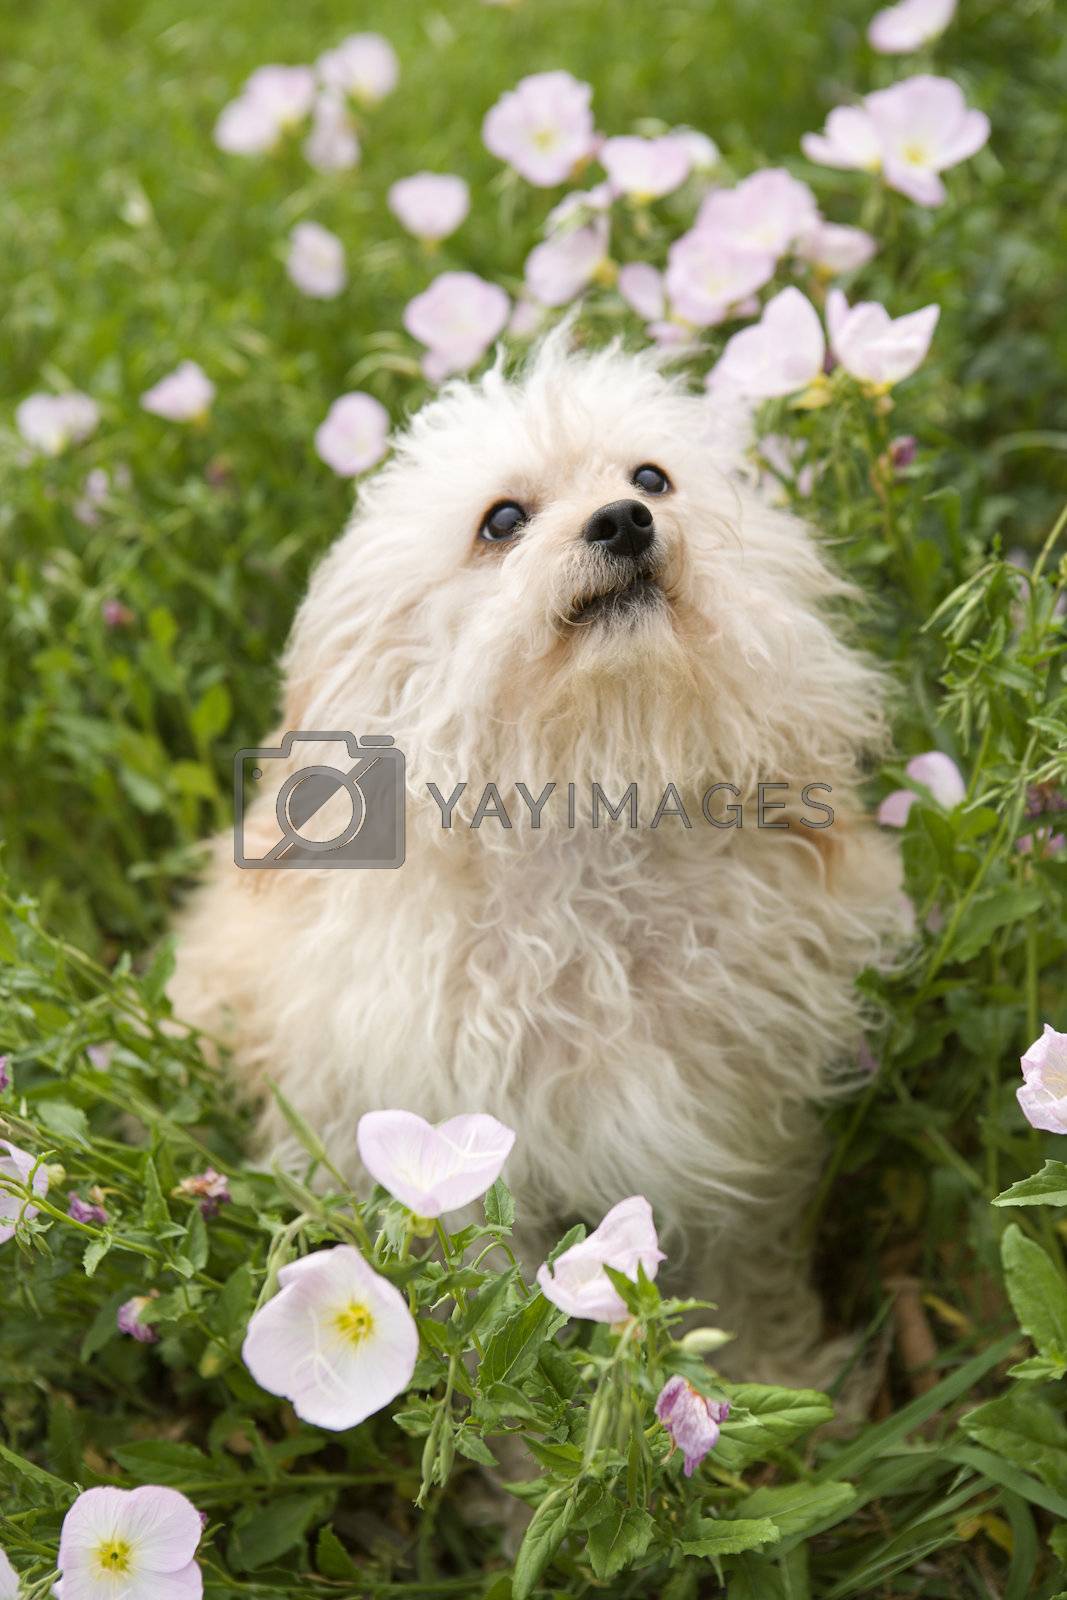 Royalty free image of Fluffy small dog in flower field. by iofoto